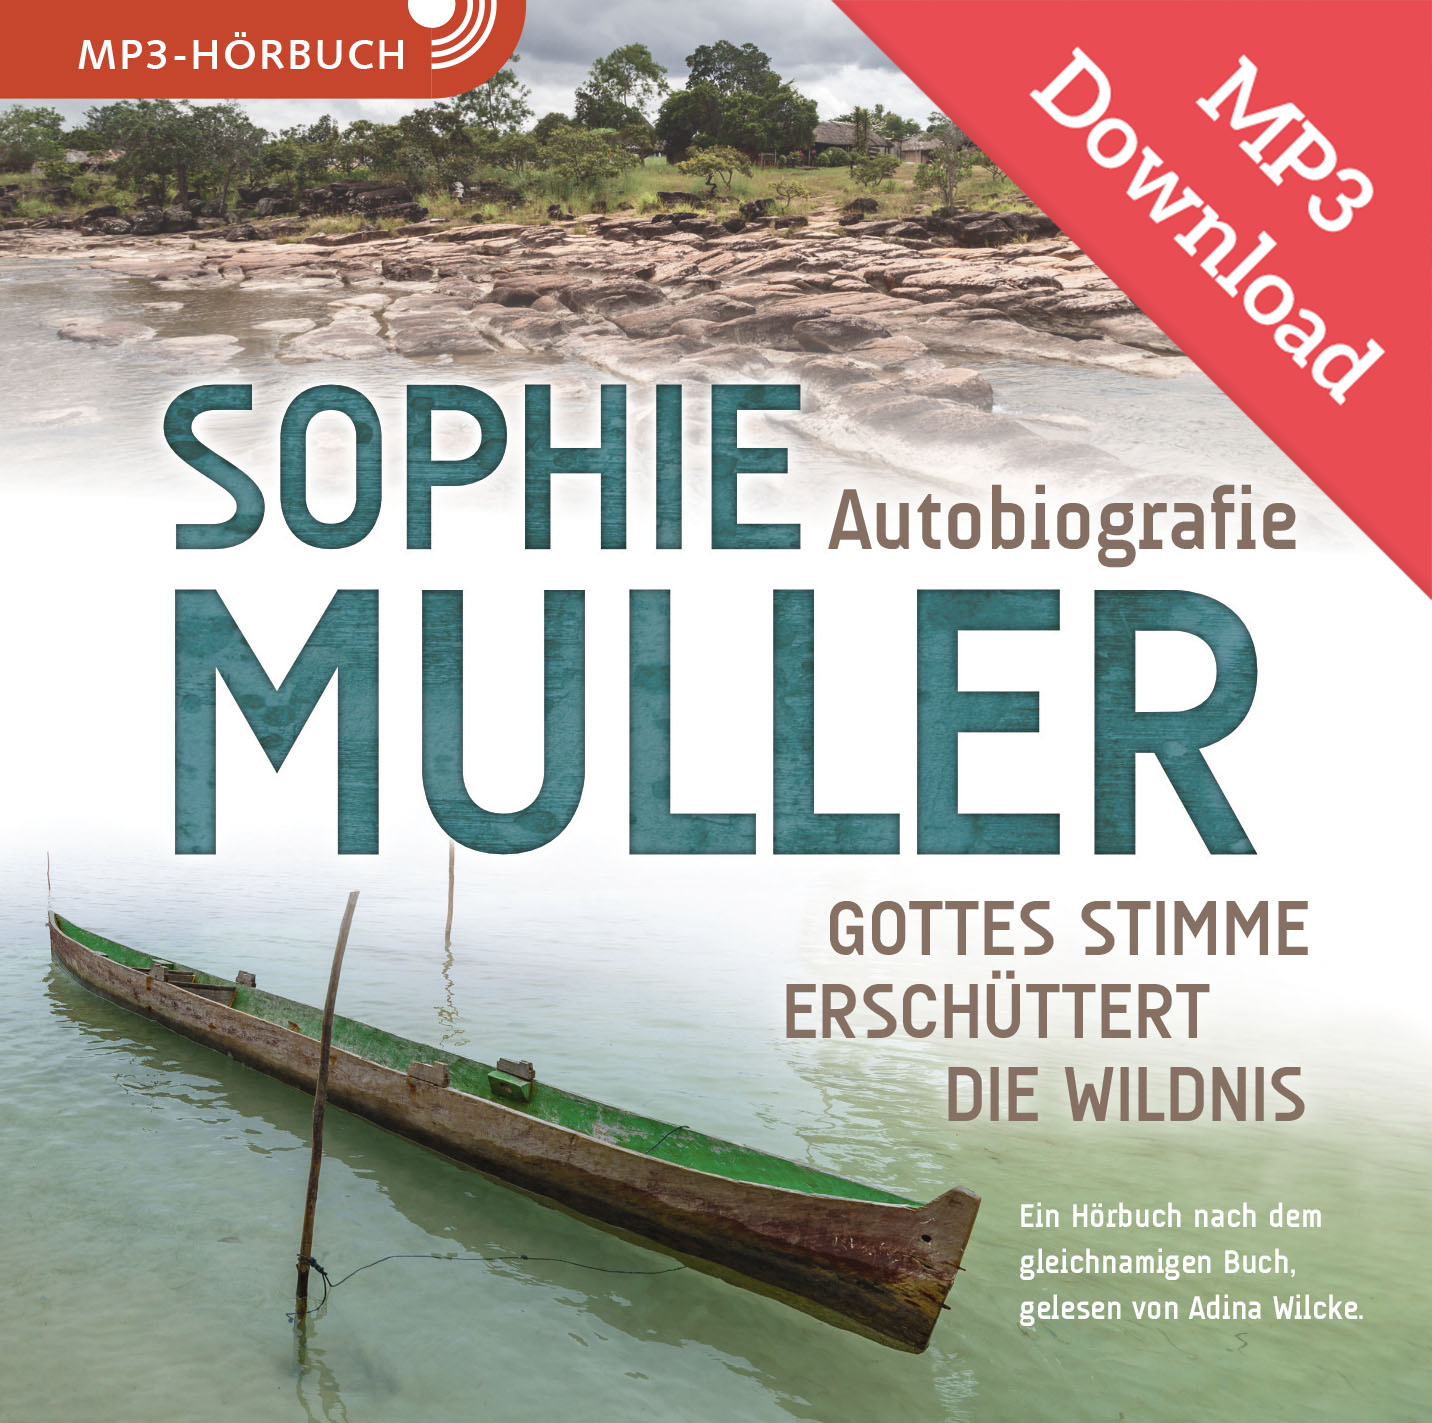 DOWNLOAD: Sophie Muller (Hörbuch [MP3])